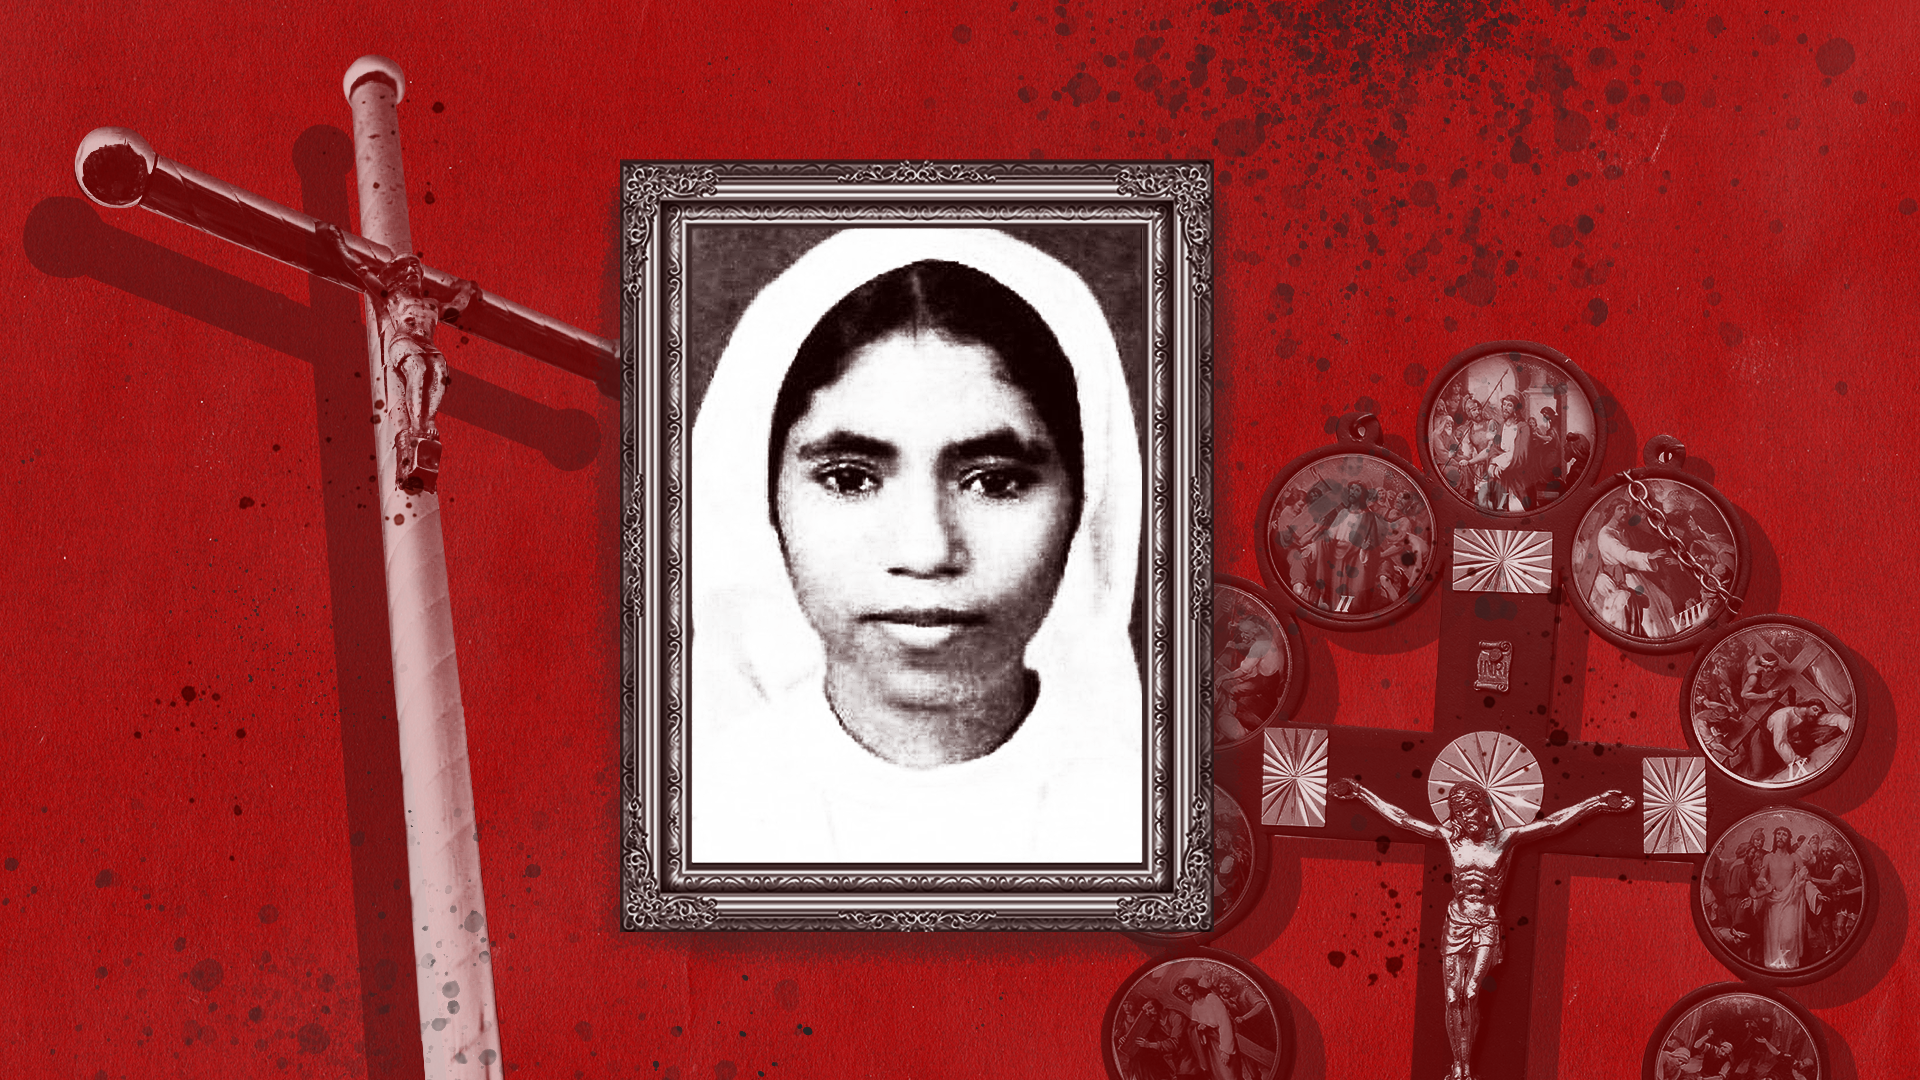 Sleeping Sis Virgin Sex - Sister Abhaya was murdered for catching an Indian priest and nun in a sex  act. Three decades later, justice is served | CNN